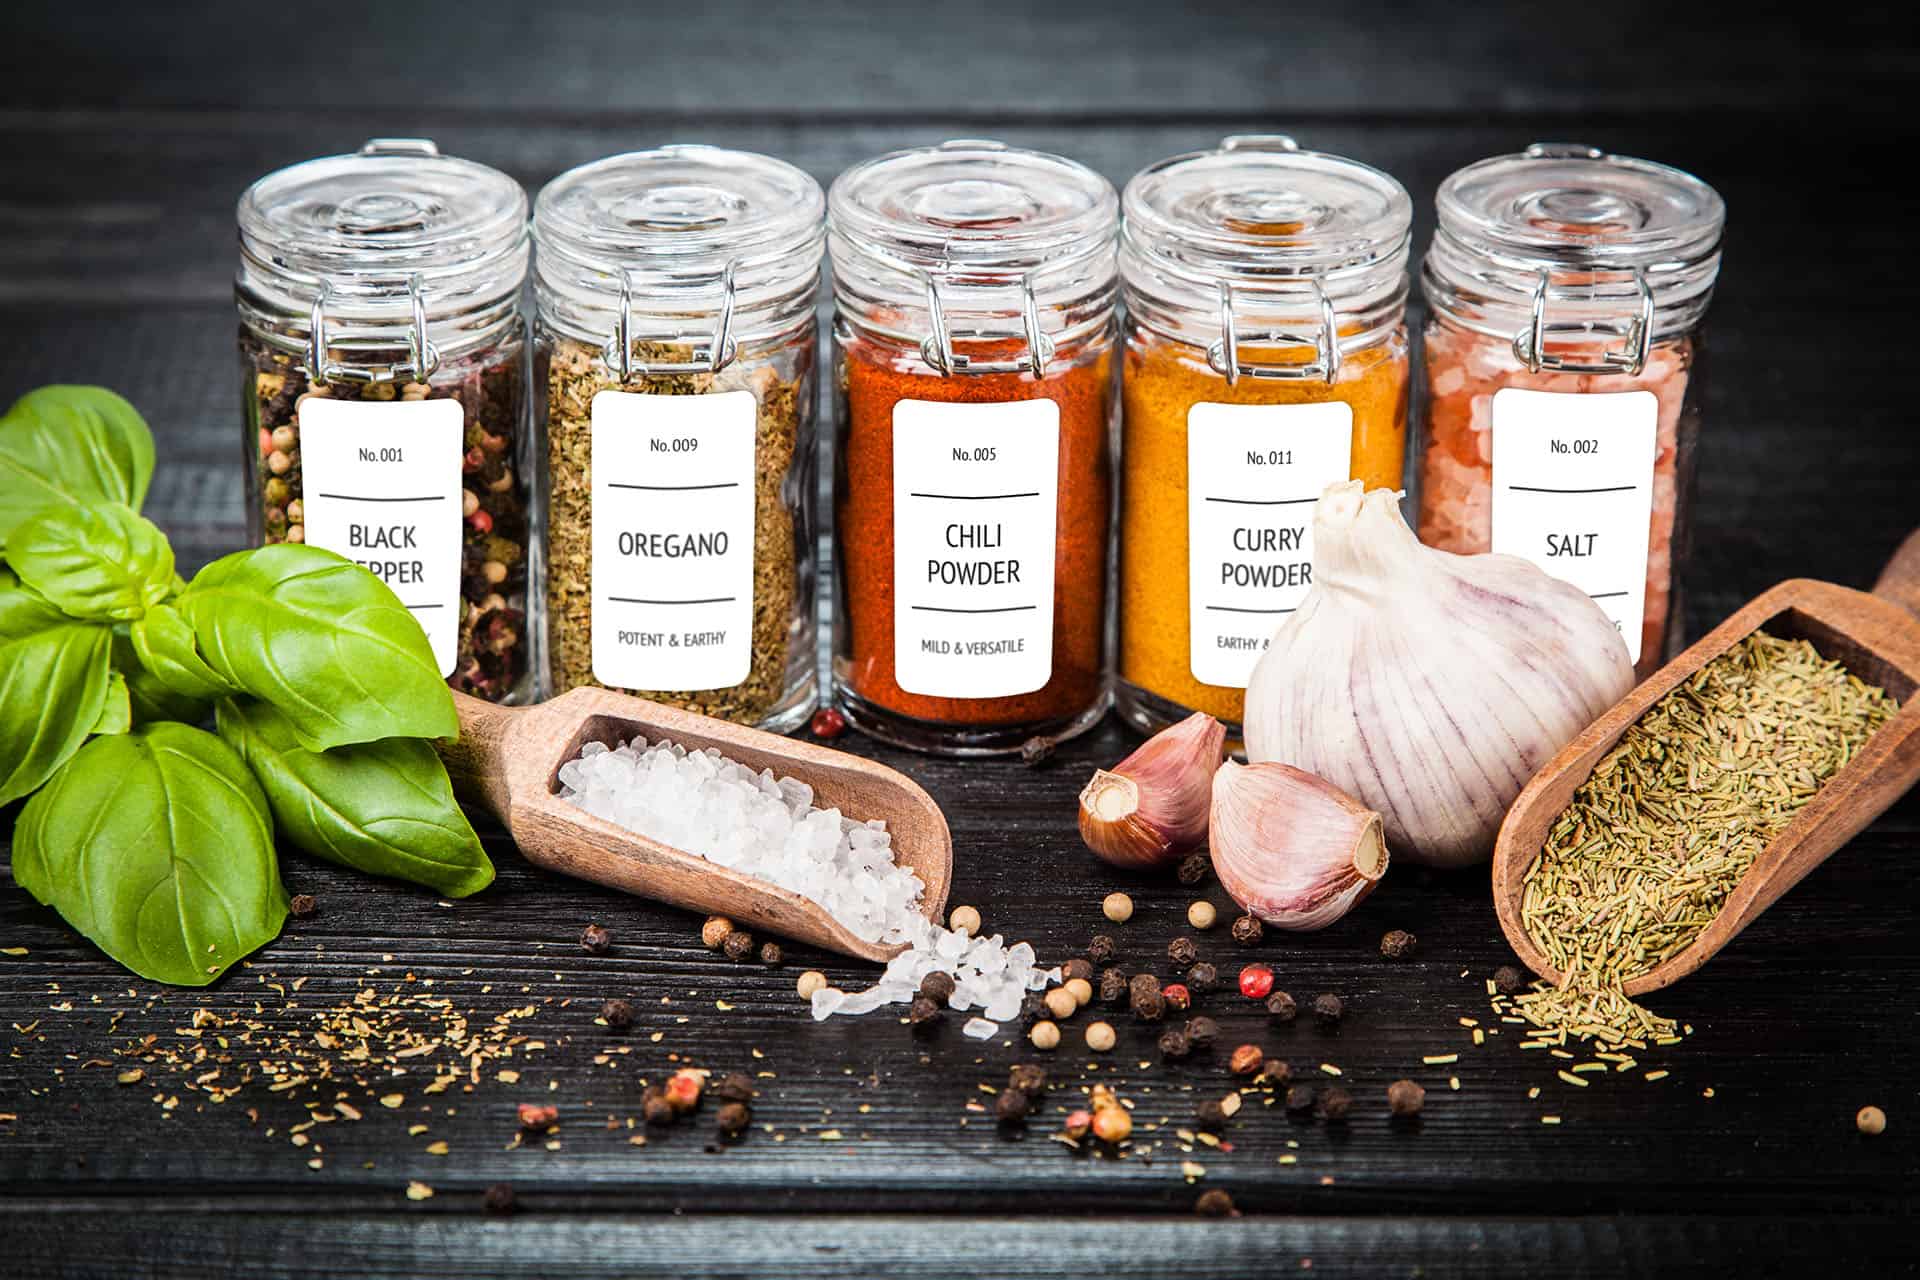 Modern style, vinyl spice bottle labels in a kitchen setting: Sleek and stylish labels on spice bottles, adding a contemporary touch to the kitchen decor while enabling easy identification of various spices.